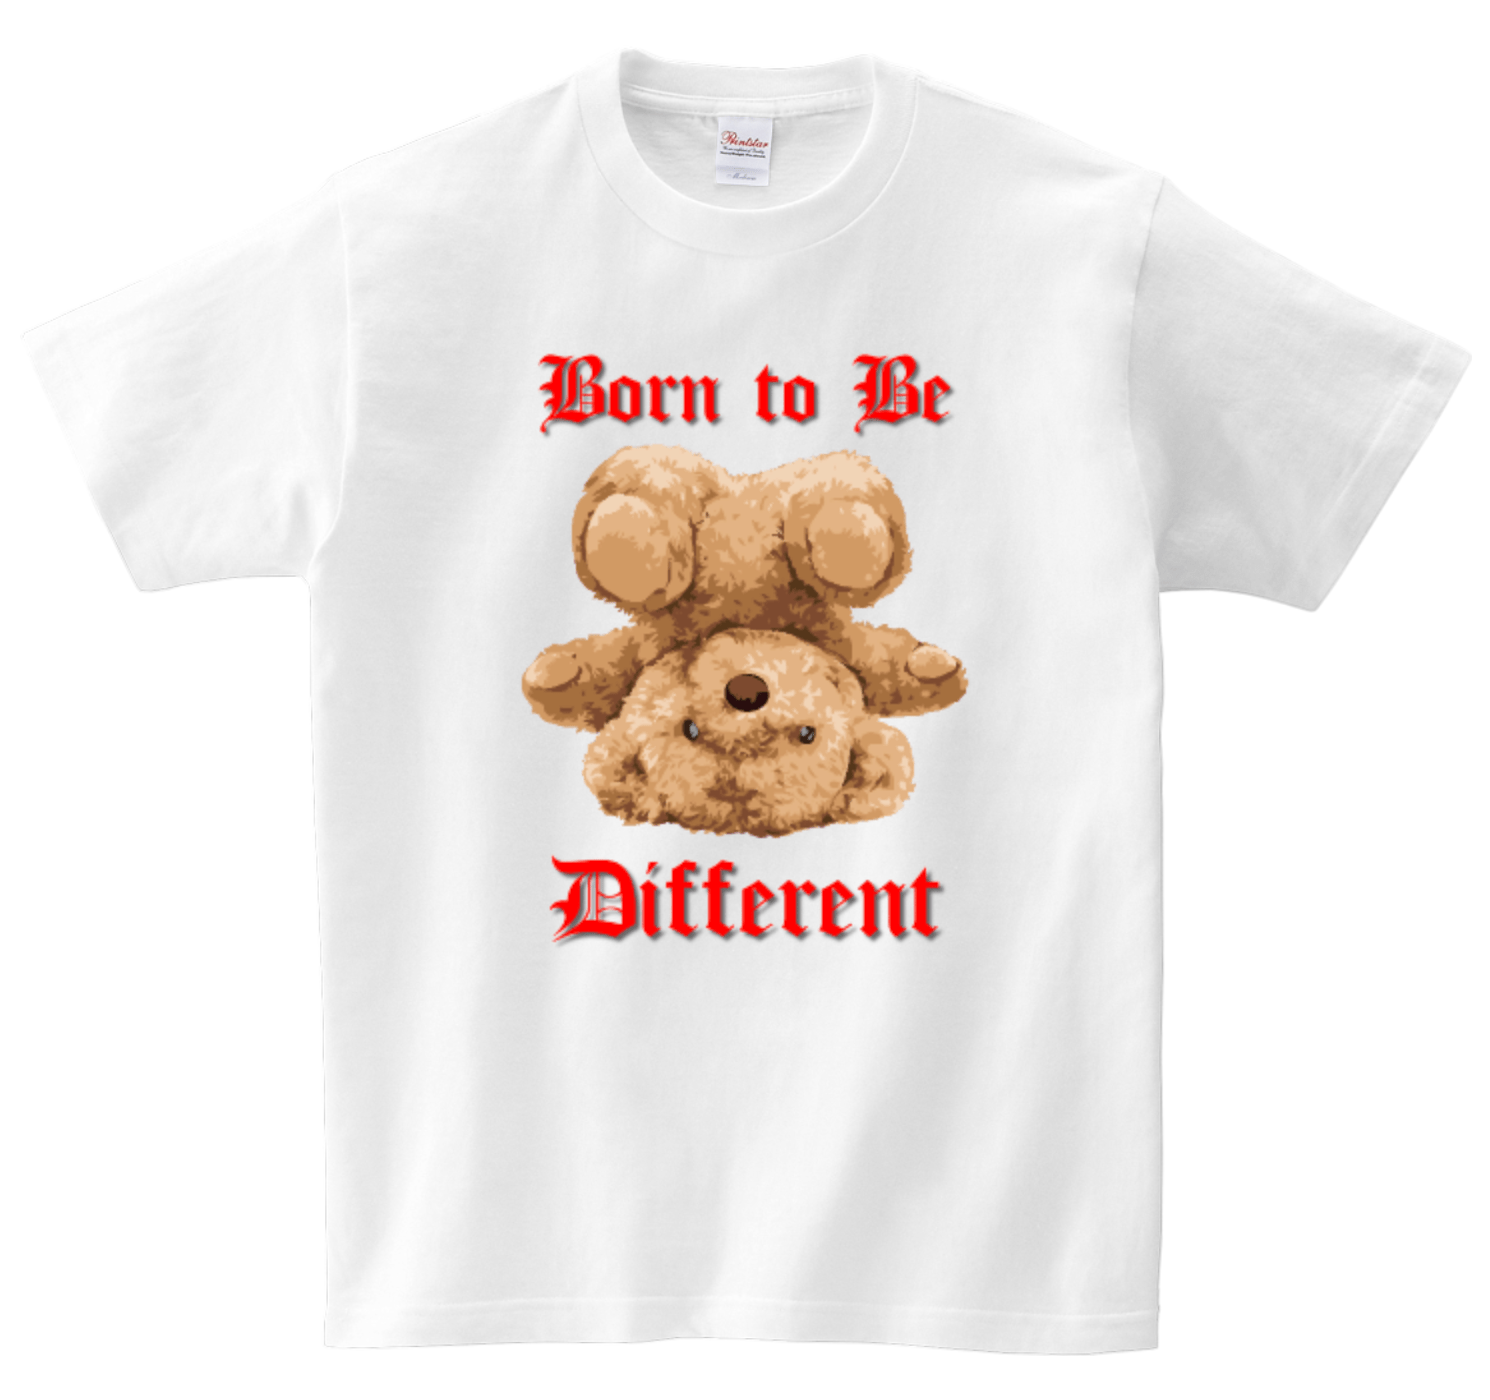 Born to be Different DTG T-Shirt | Full Color Edition (Direct to garment)